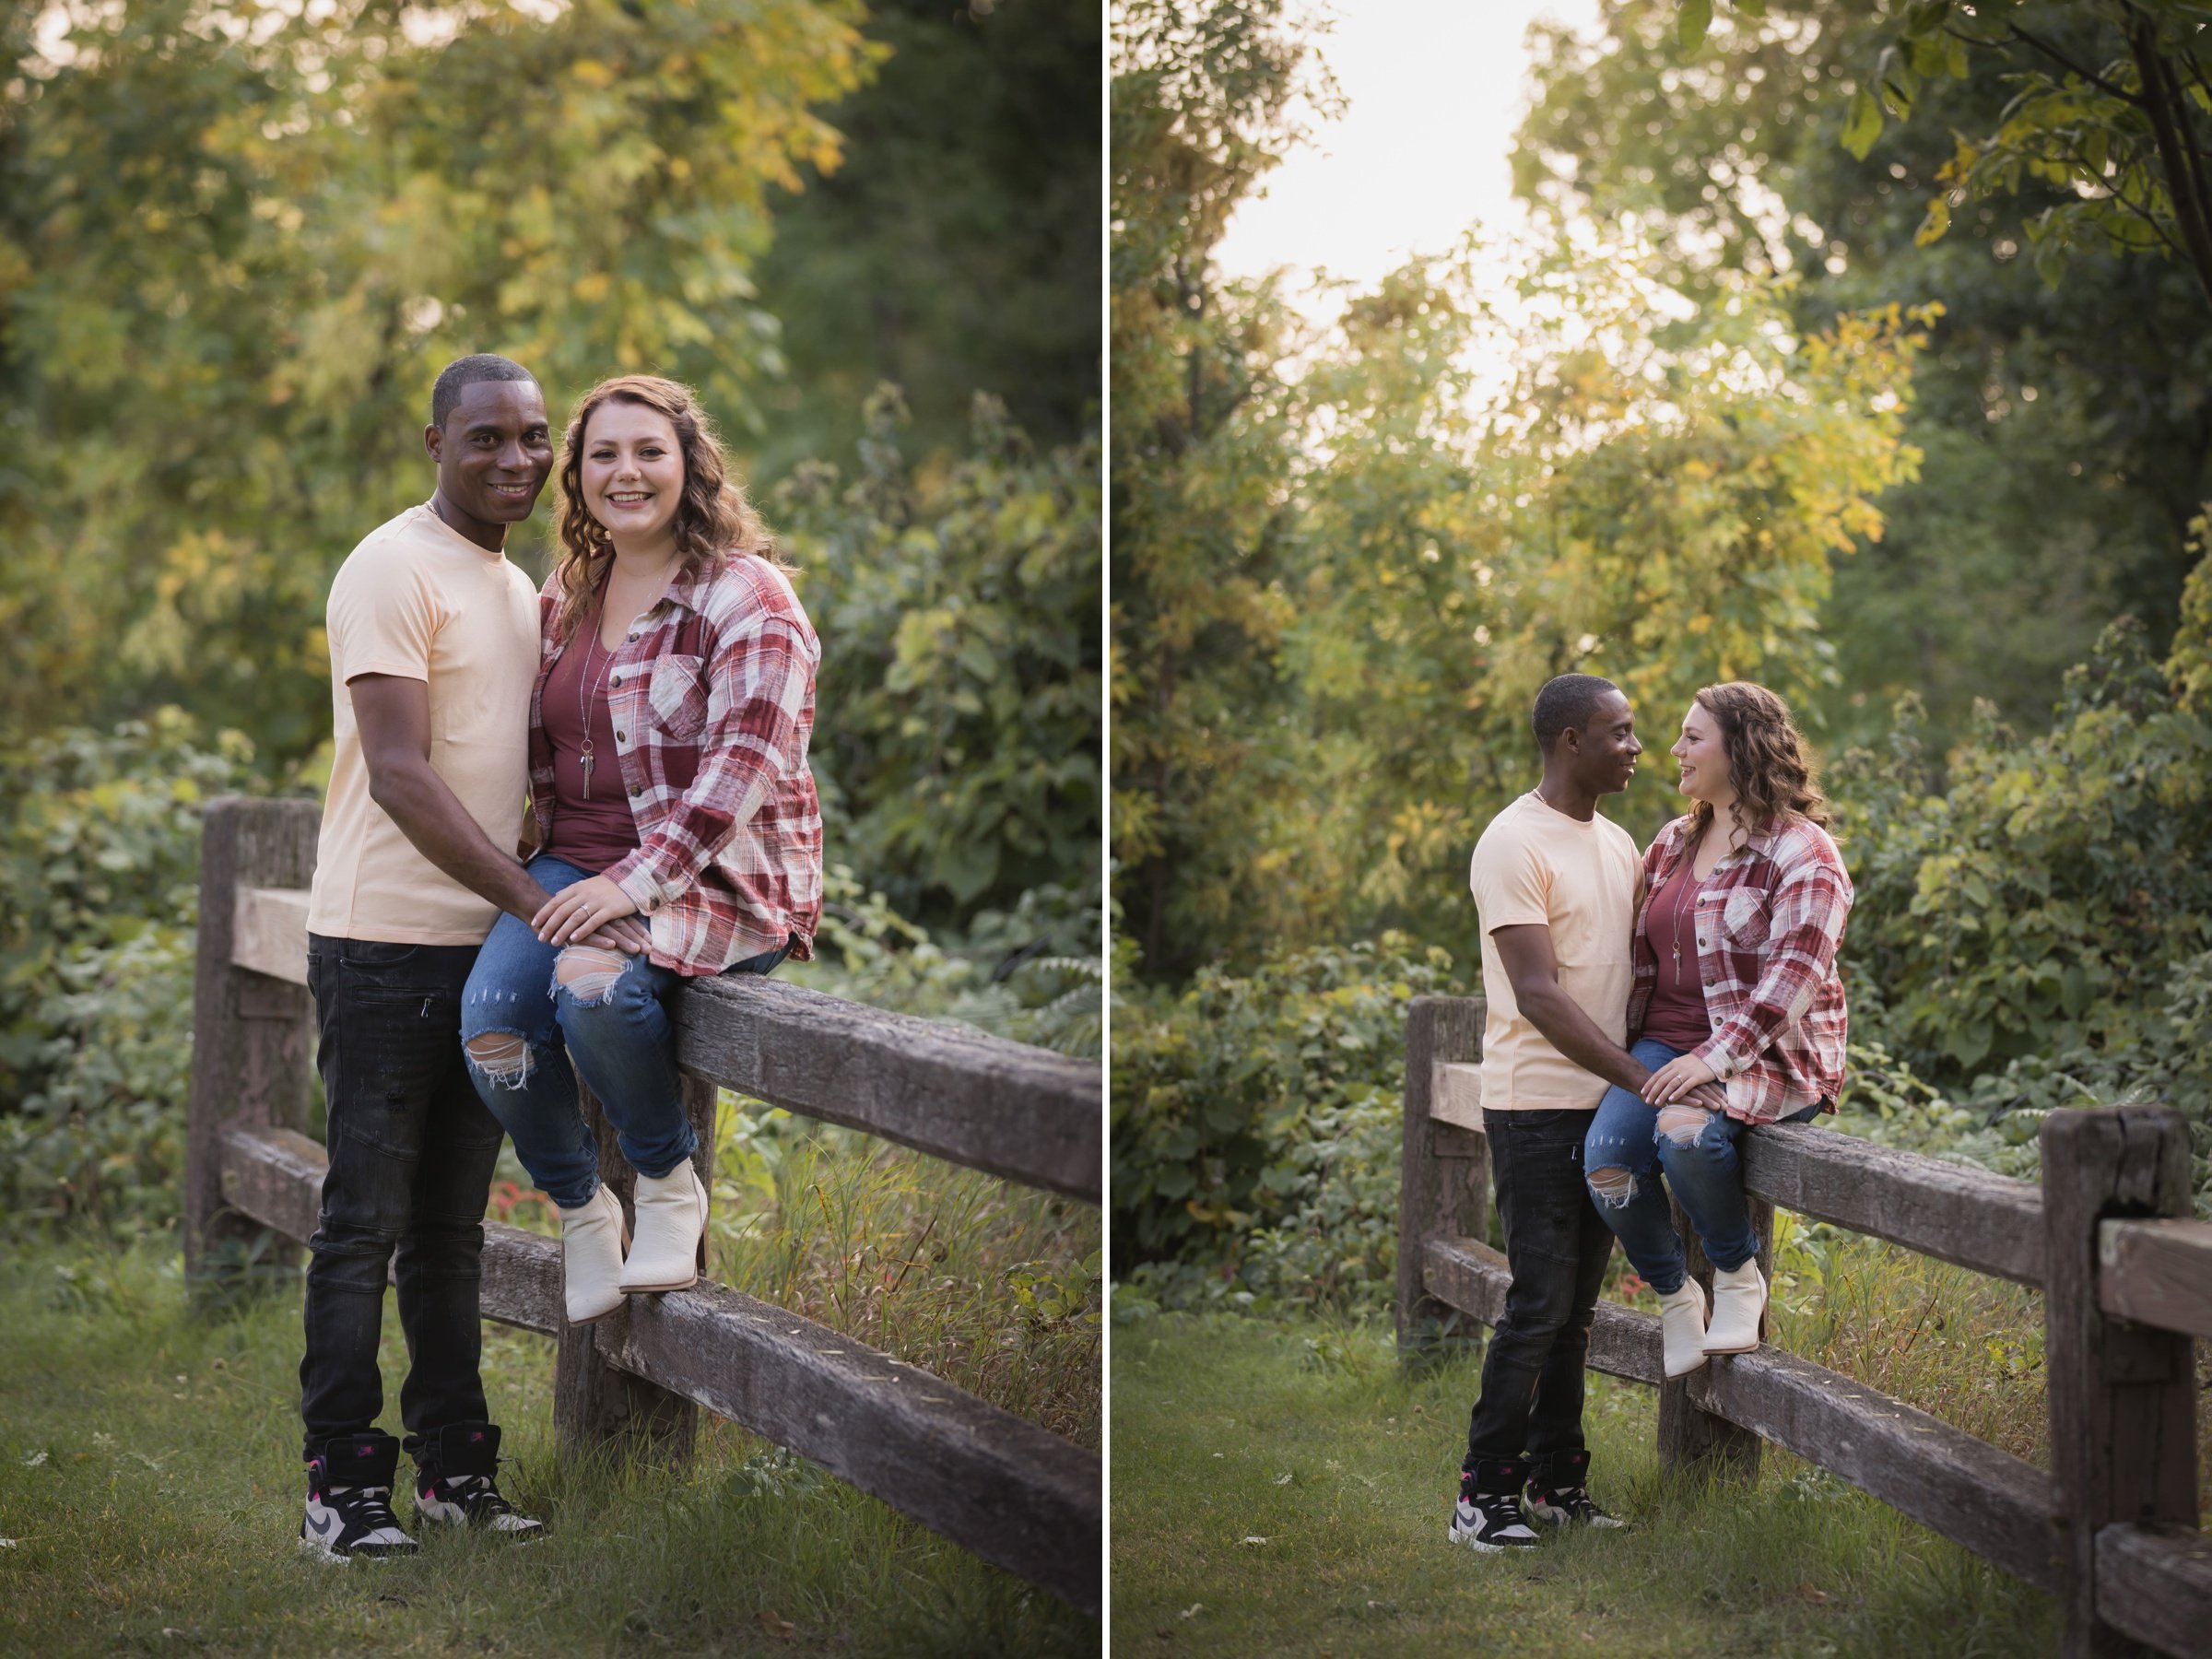 Jessica and Paul - A Sunset Bay Shore Park Engagement Session09.jpg